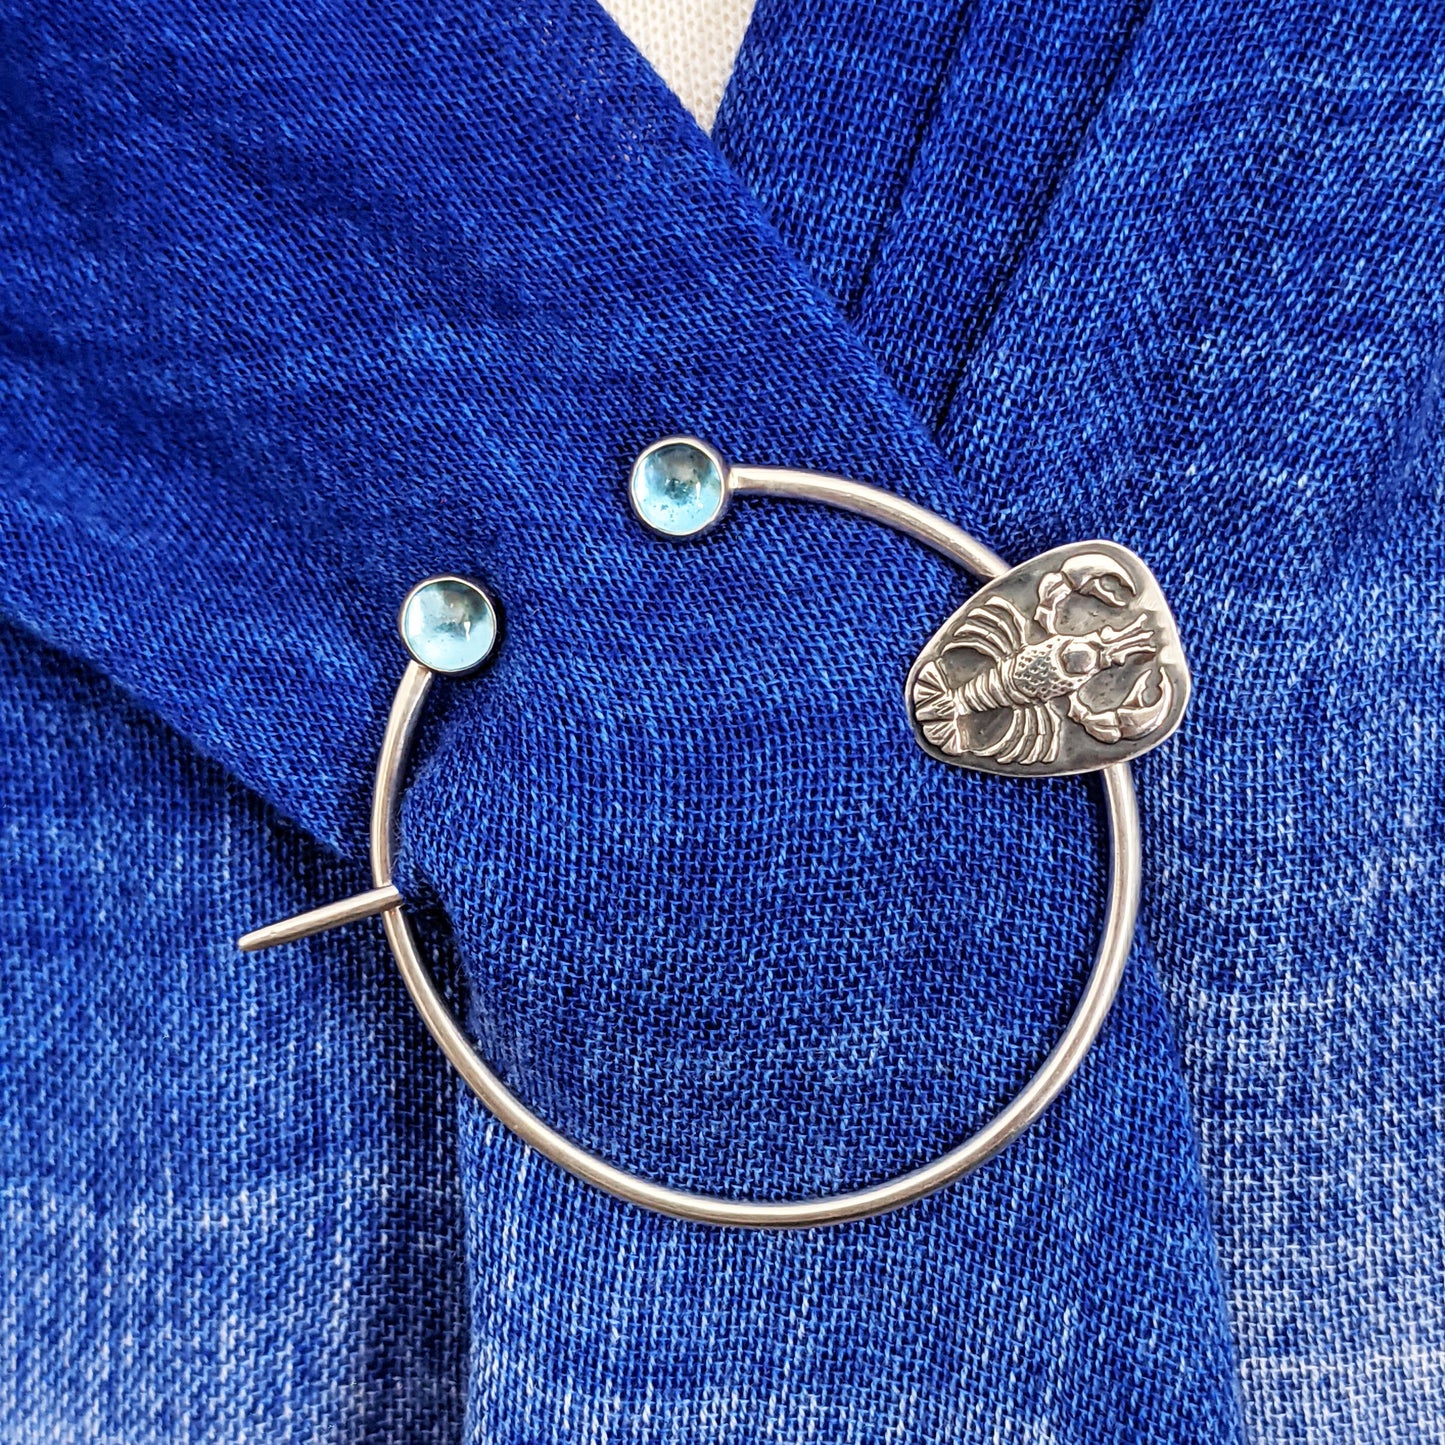 Sterling silver penannular brooch. The tip of the stem is decorated with a detailed dimensional lobster, and the ends of the loop have bright swiss blue topaz gemstone cabochons. Shown modeled on a blue shawl.